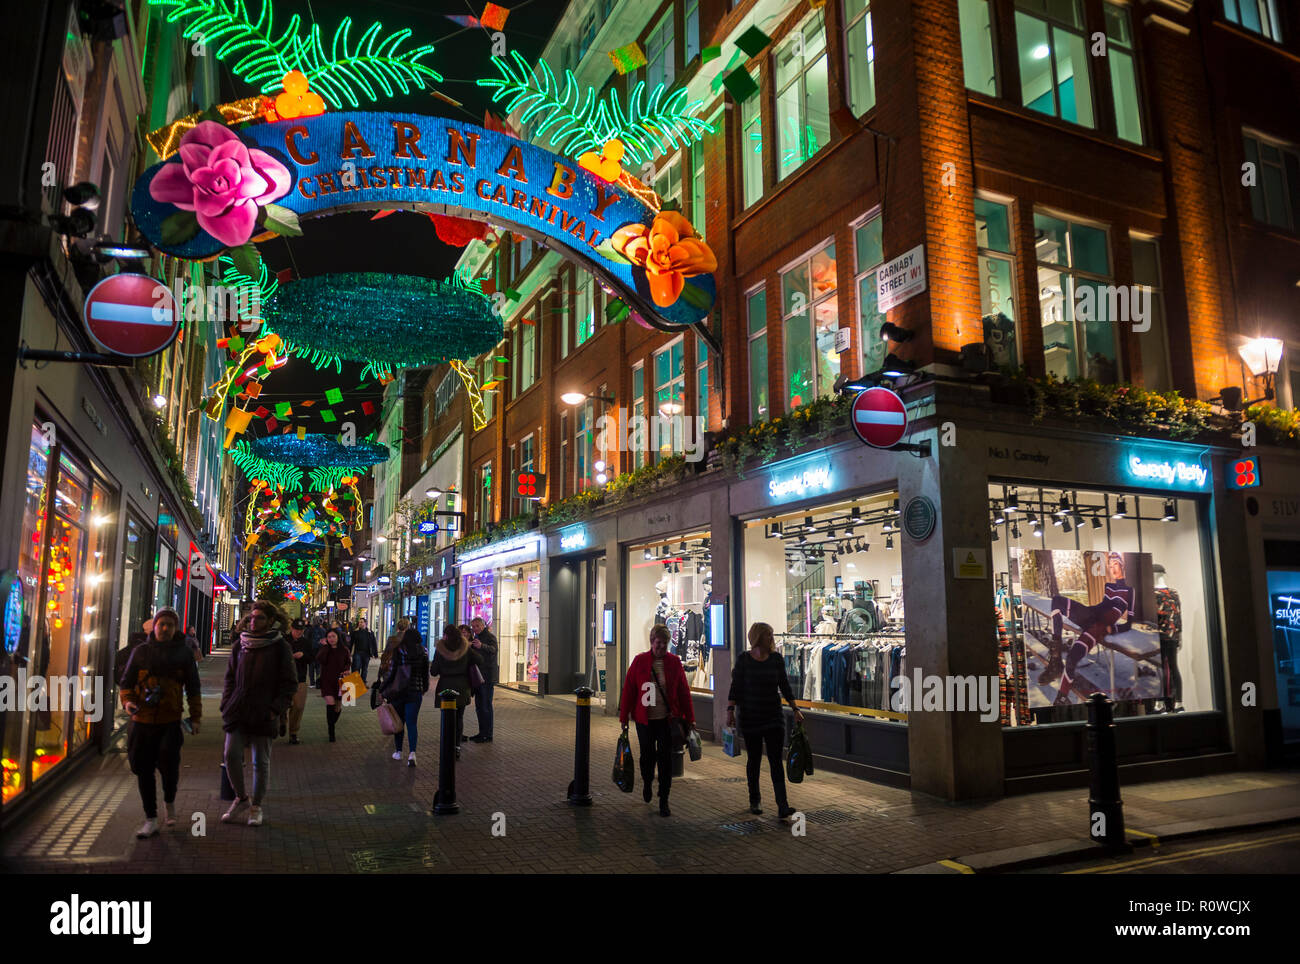 LONDON - CIRCA DECEMBER, 2017: Holiday crowds pass under Carnival themed Christmas signs in the pedestrianized shopping district of Carnaby Street. Stock Photo